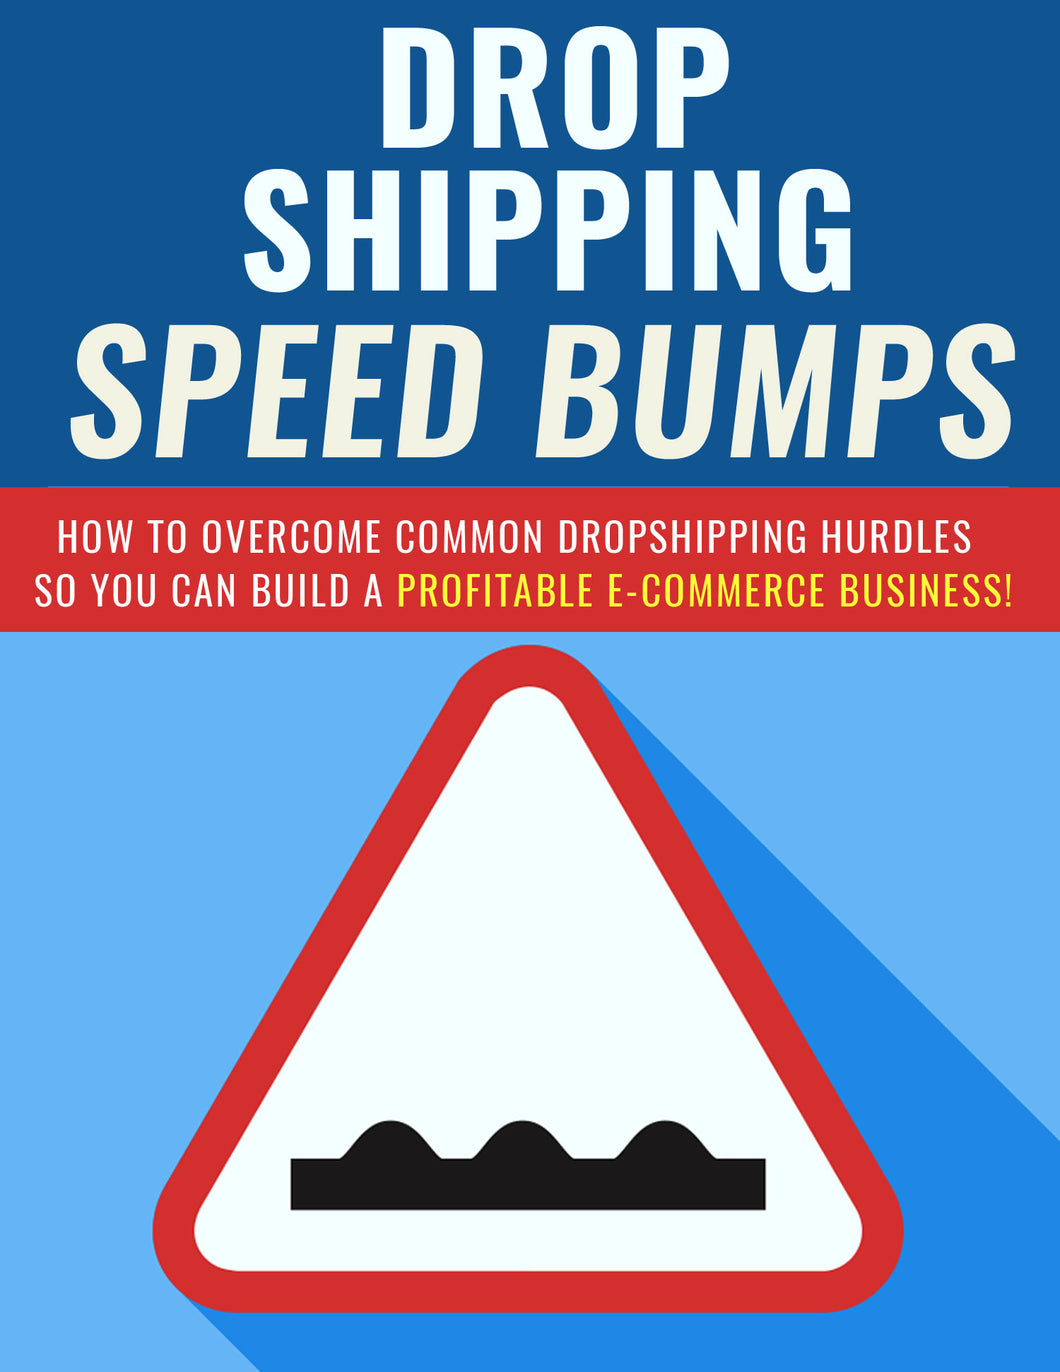 Avoid Dropshipping Mistakes